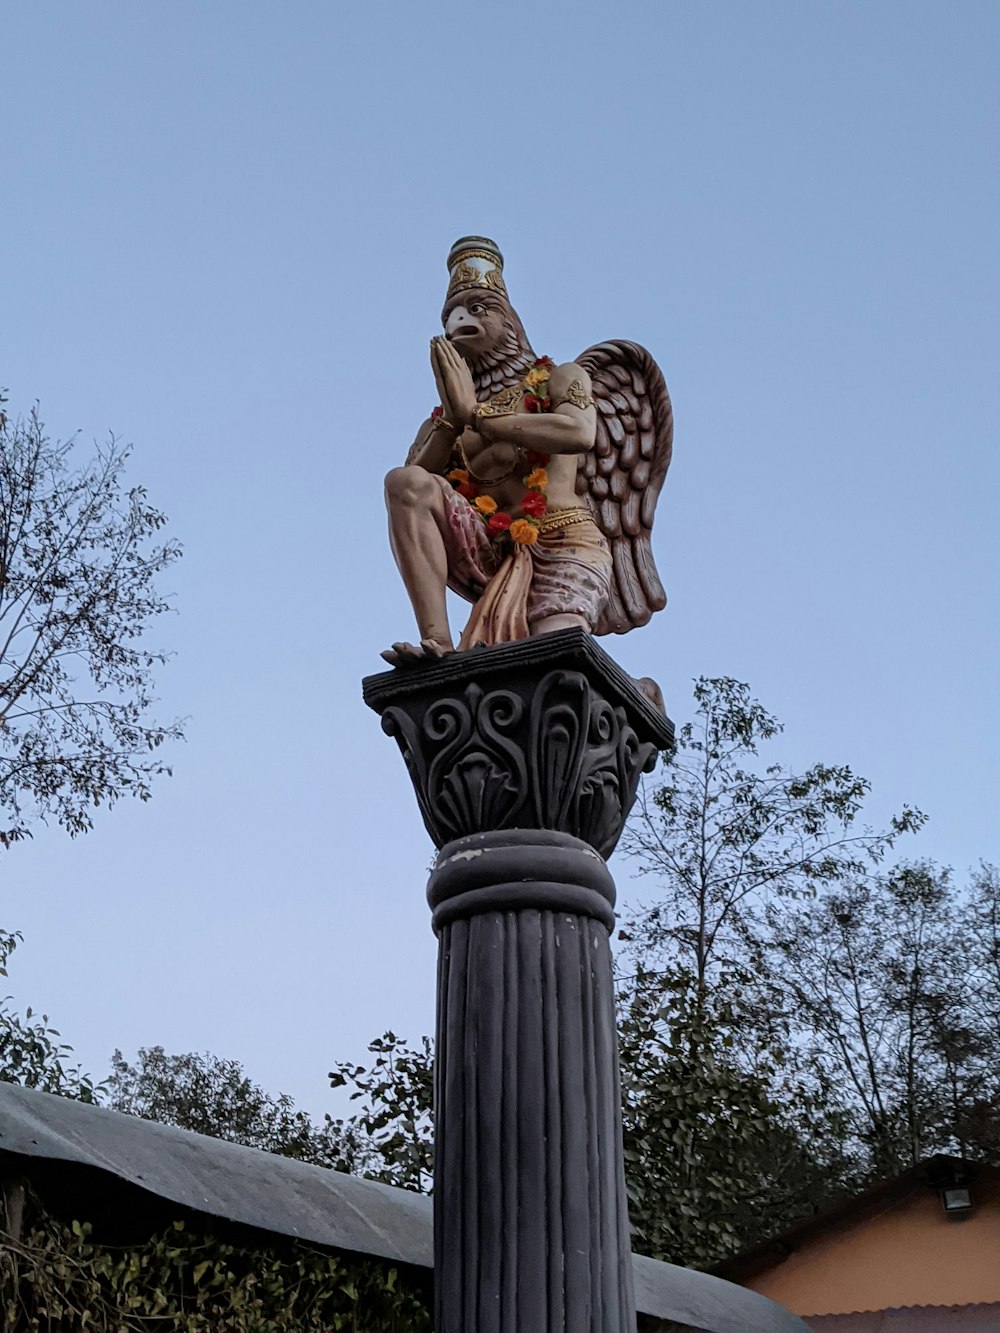 a statue of a man sitting on top of a pillar